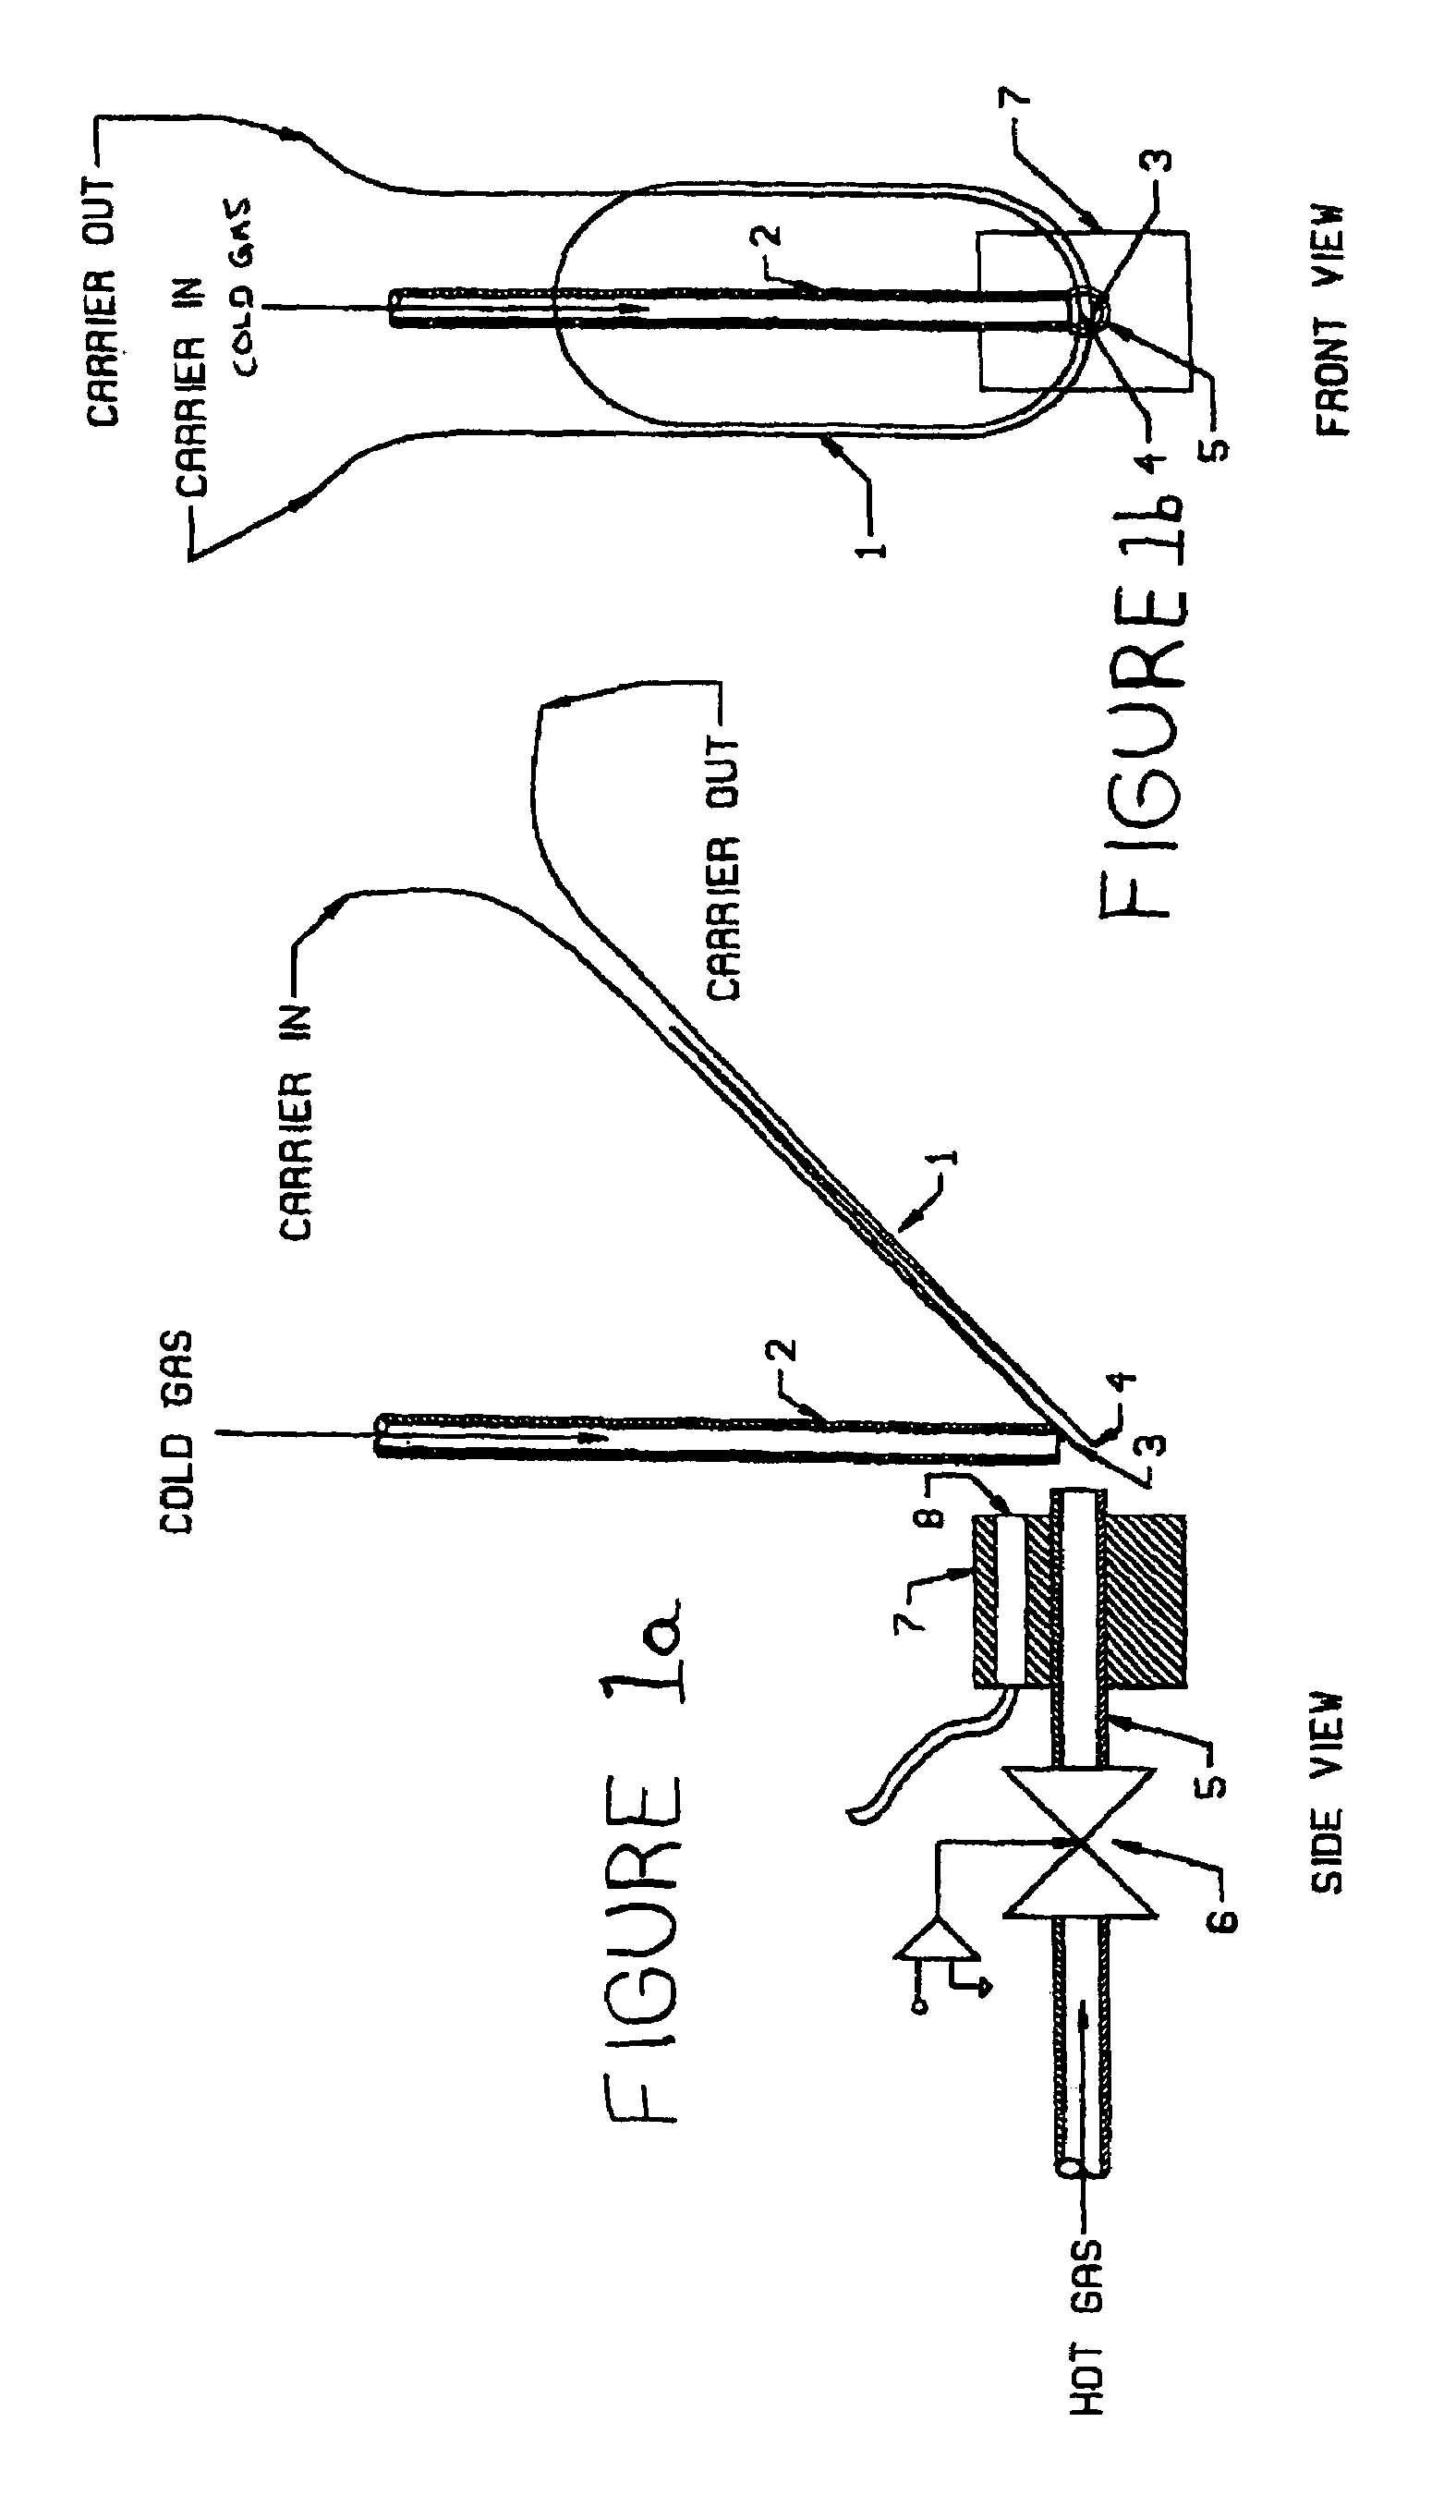 Method and apparatus for measuring velocity of chromatographic pulse